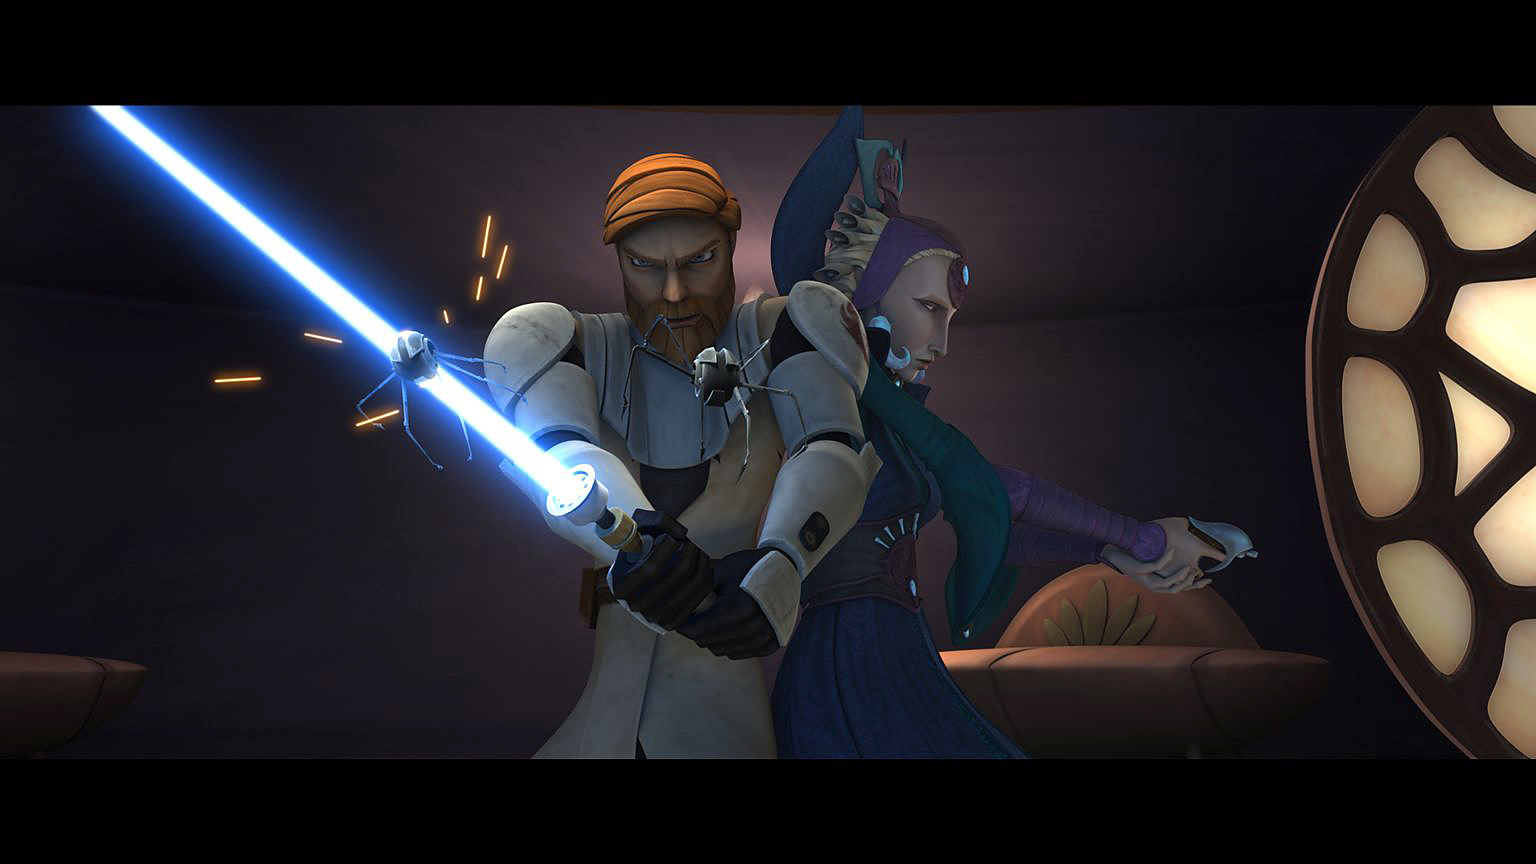 Obi-Wan Kenobi and Duchess Satine Kryze of Mandalore prepare to fend off an attack in “Voyage of Temptation,” an all-new episode of STAR WARS: THE CLONE WARS premiering at 9:00 p.m. ET/PT Friday, February 5 on Cartoon Network. TM & © 2010 Lucasfilm Ltd. All rights reserved. 